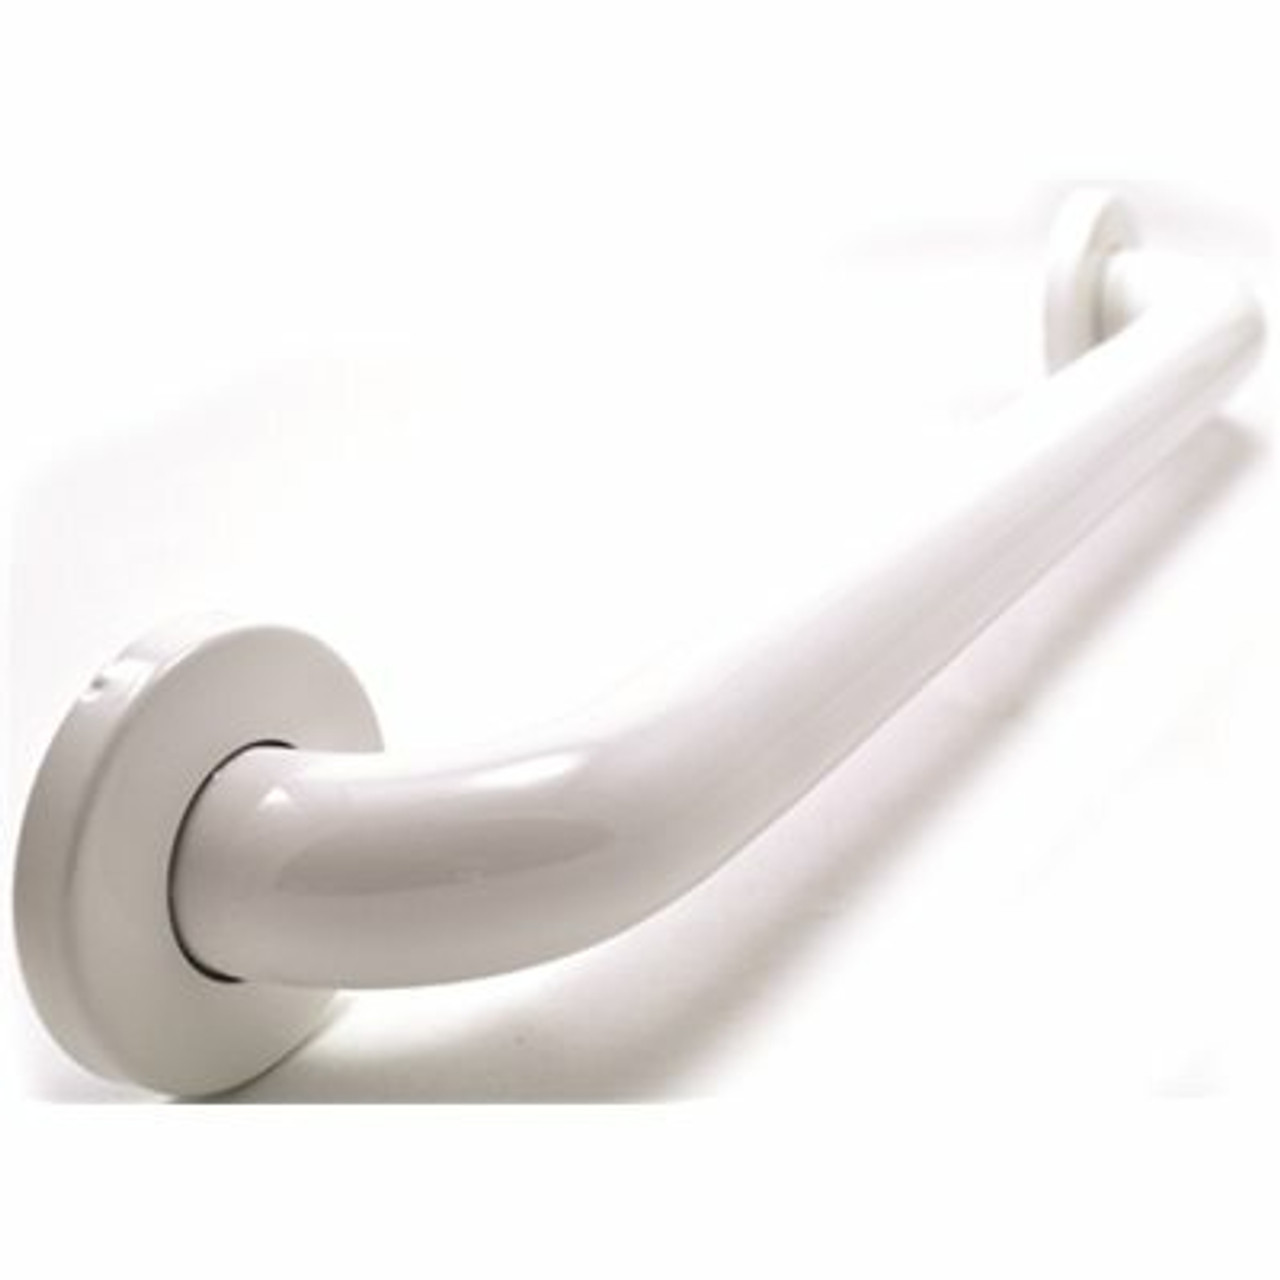 Wingits Premium 36 In. X 1.5 In. Polyester Painted Stainless Steel Grab Bar In White (39 In. Overall Length)